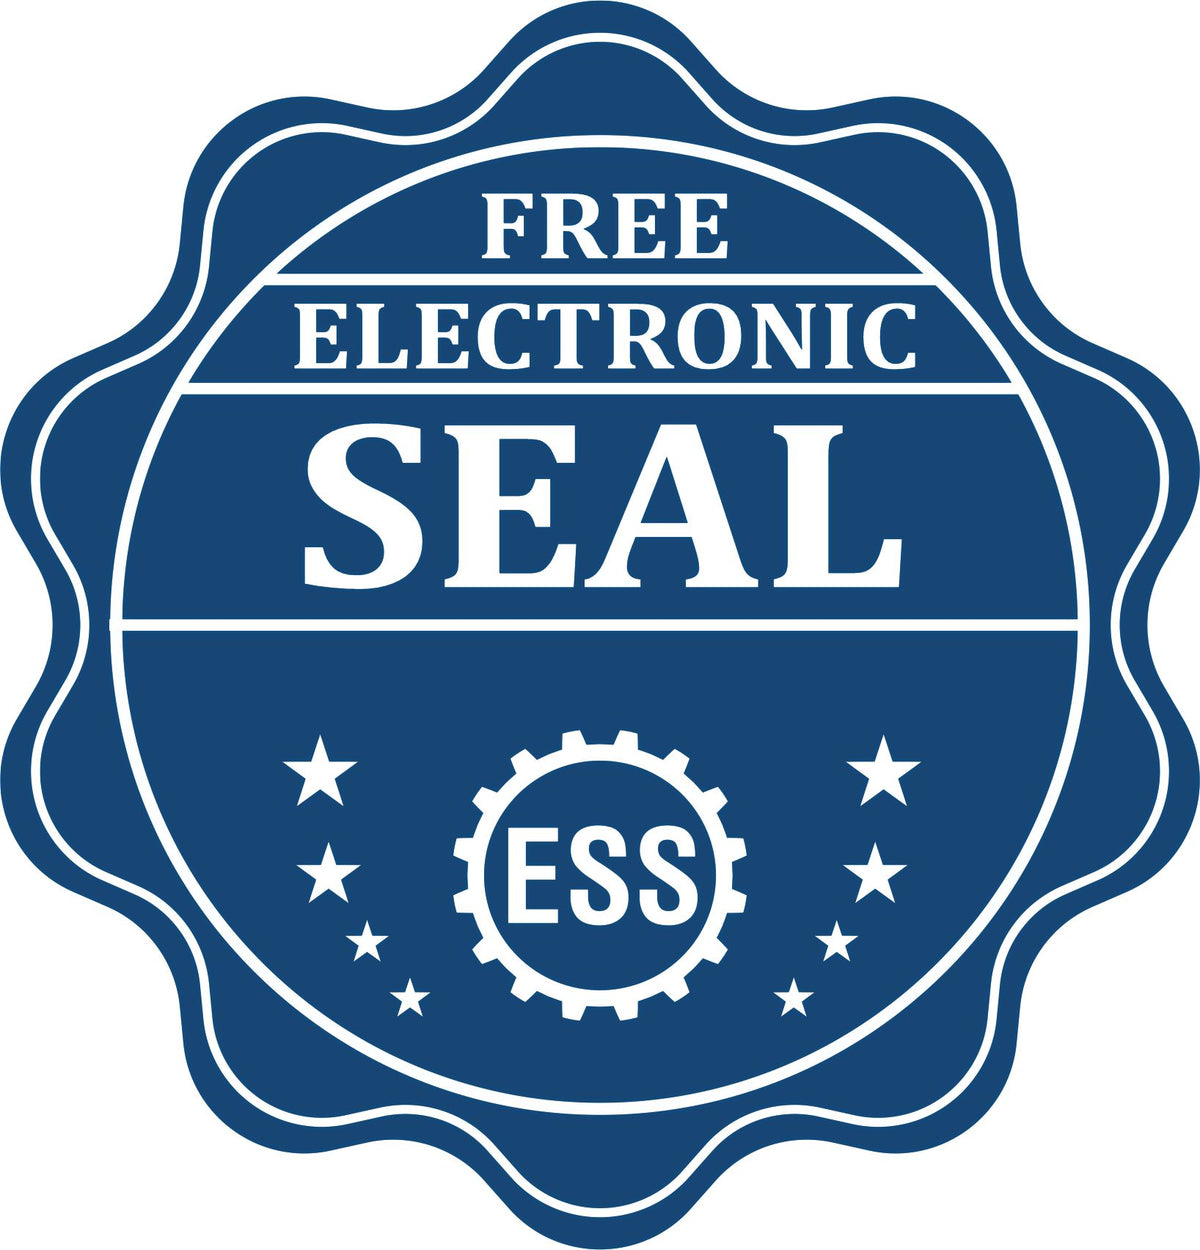 A badge showing a free electronic seal for the Hybrid Vermont Landscape Architect Seal with stars and the ESS gear on the emblem.